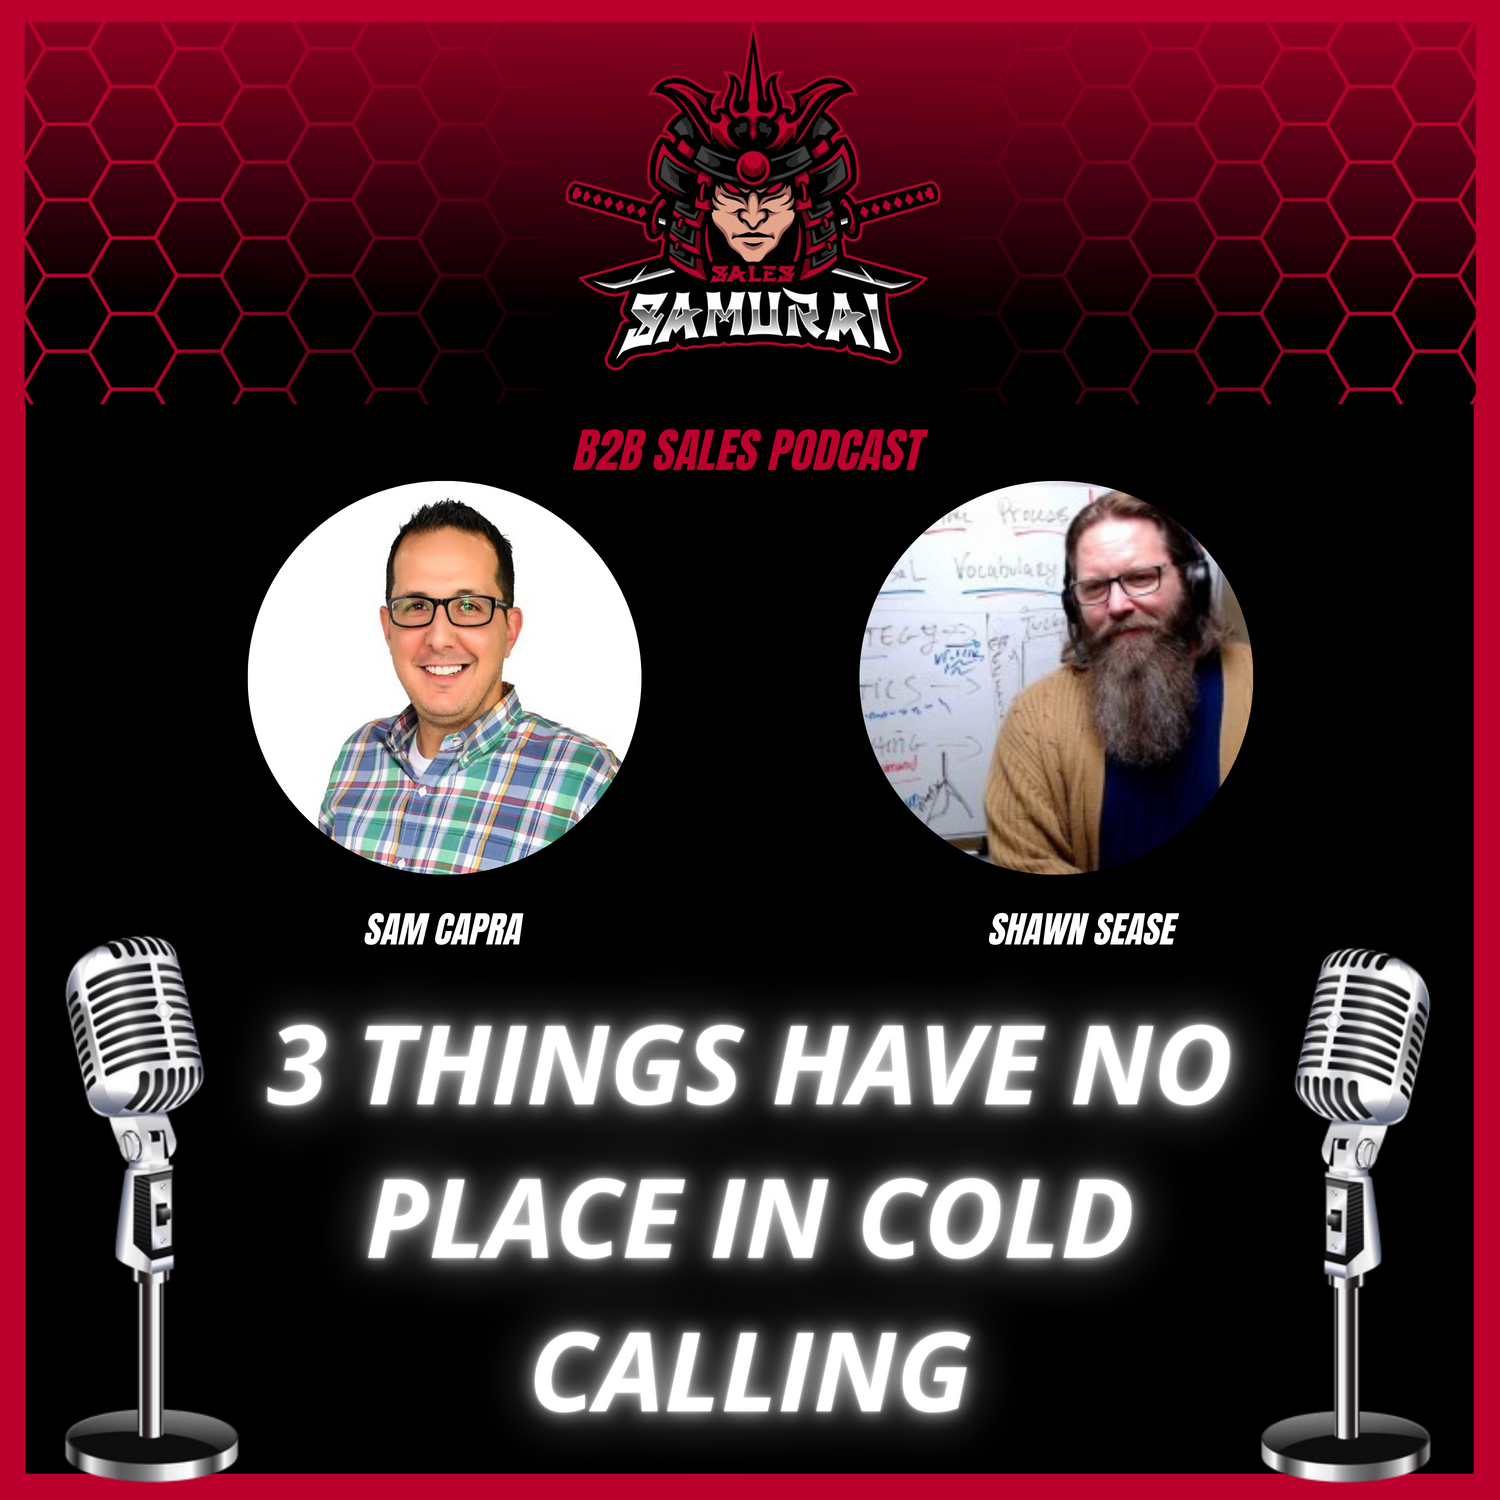 3 Things Have No Place in Cold Calling Image